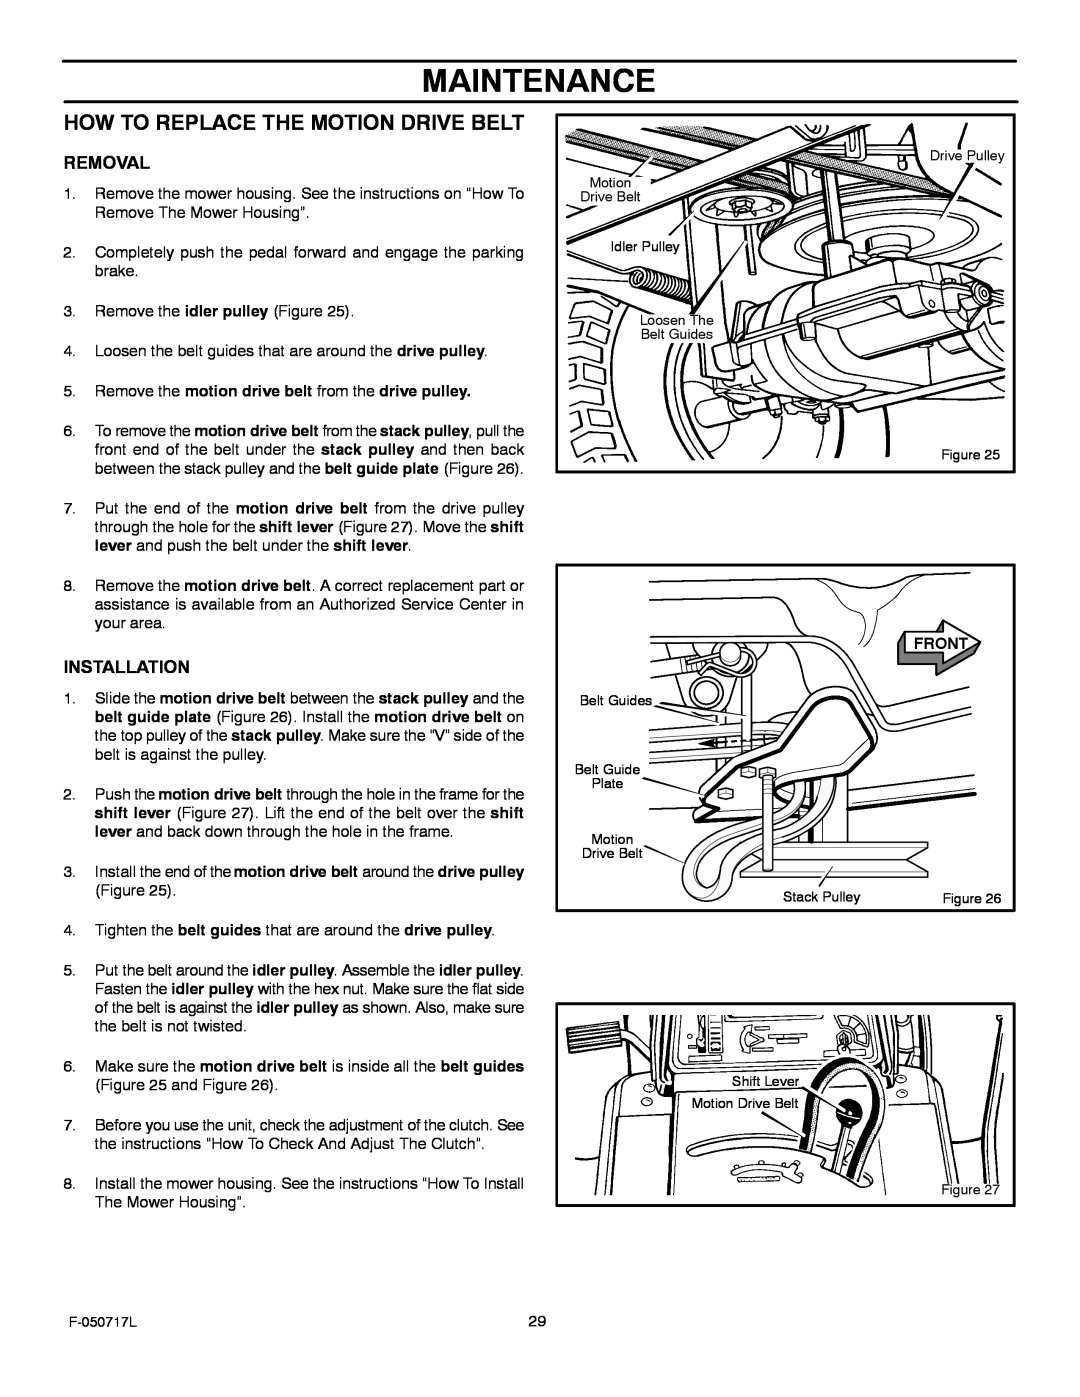 Murray 387002x92D manual Maintenance, How To Replace The Motion Drive Belt, Removal, Installation 